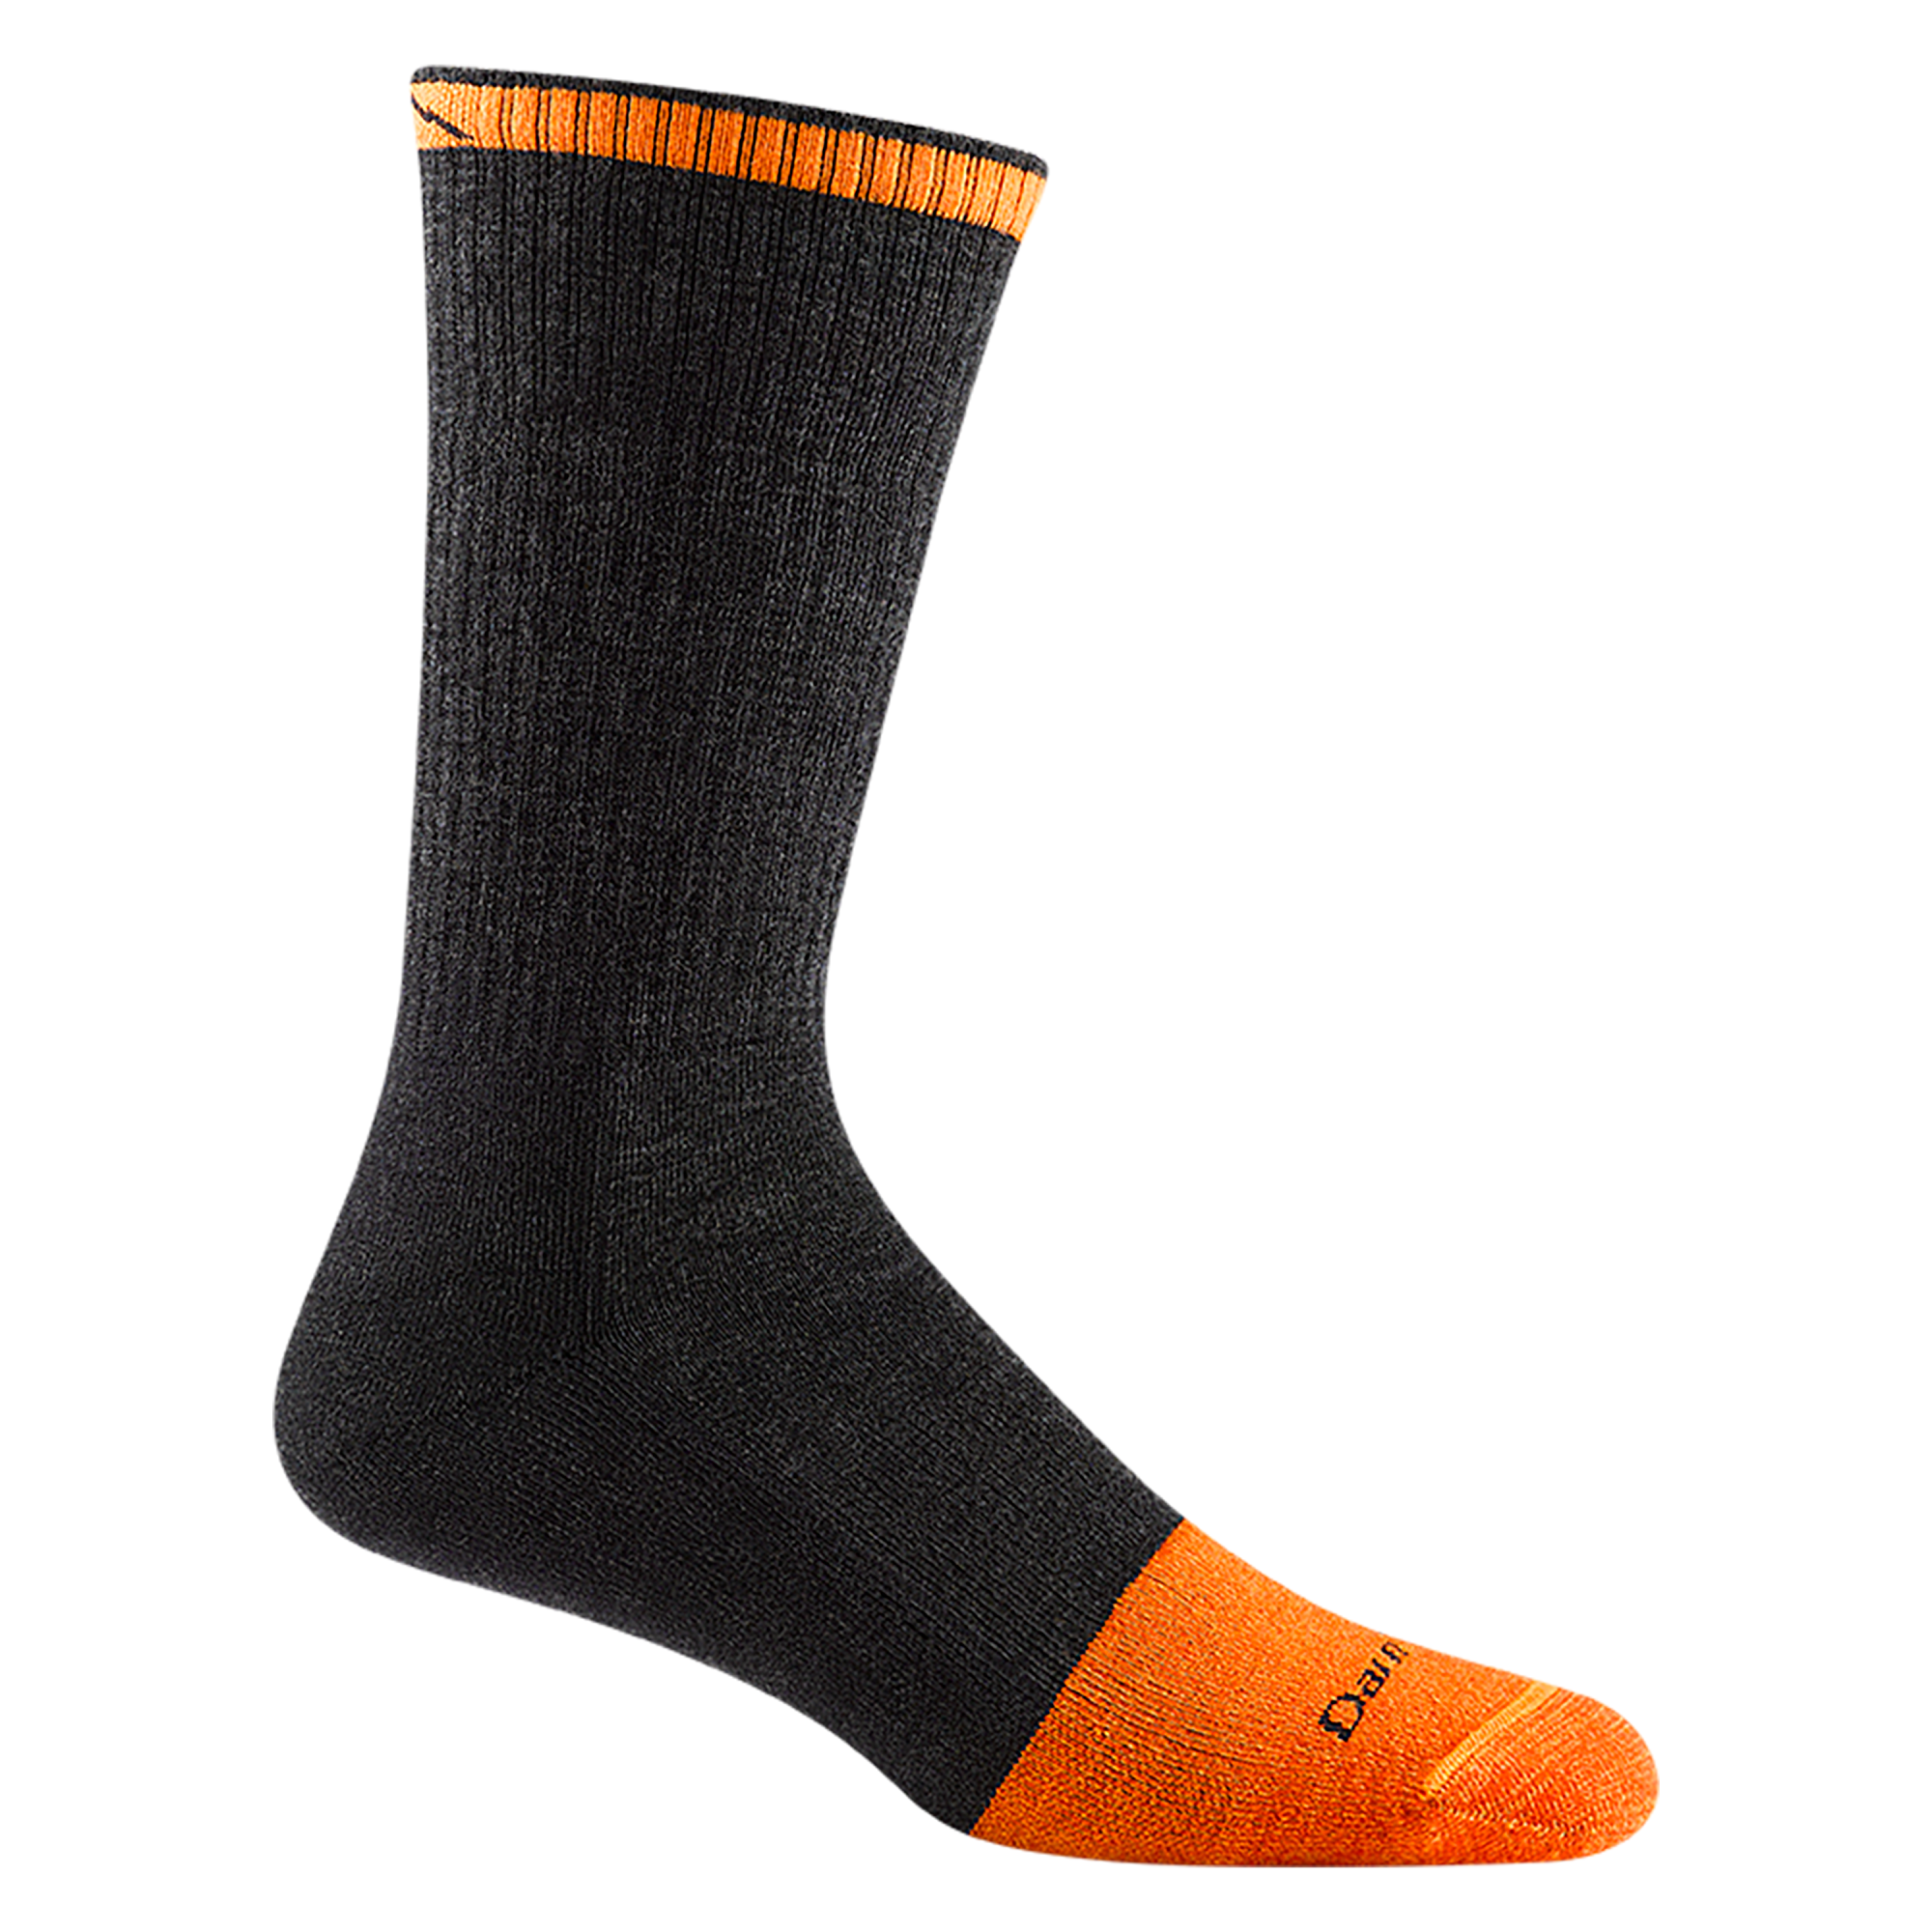 2006 men's steely boot work sock in graphite gray with orange toe/trim accents and black darn tough logo on forefoot